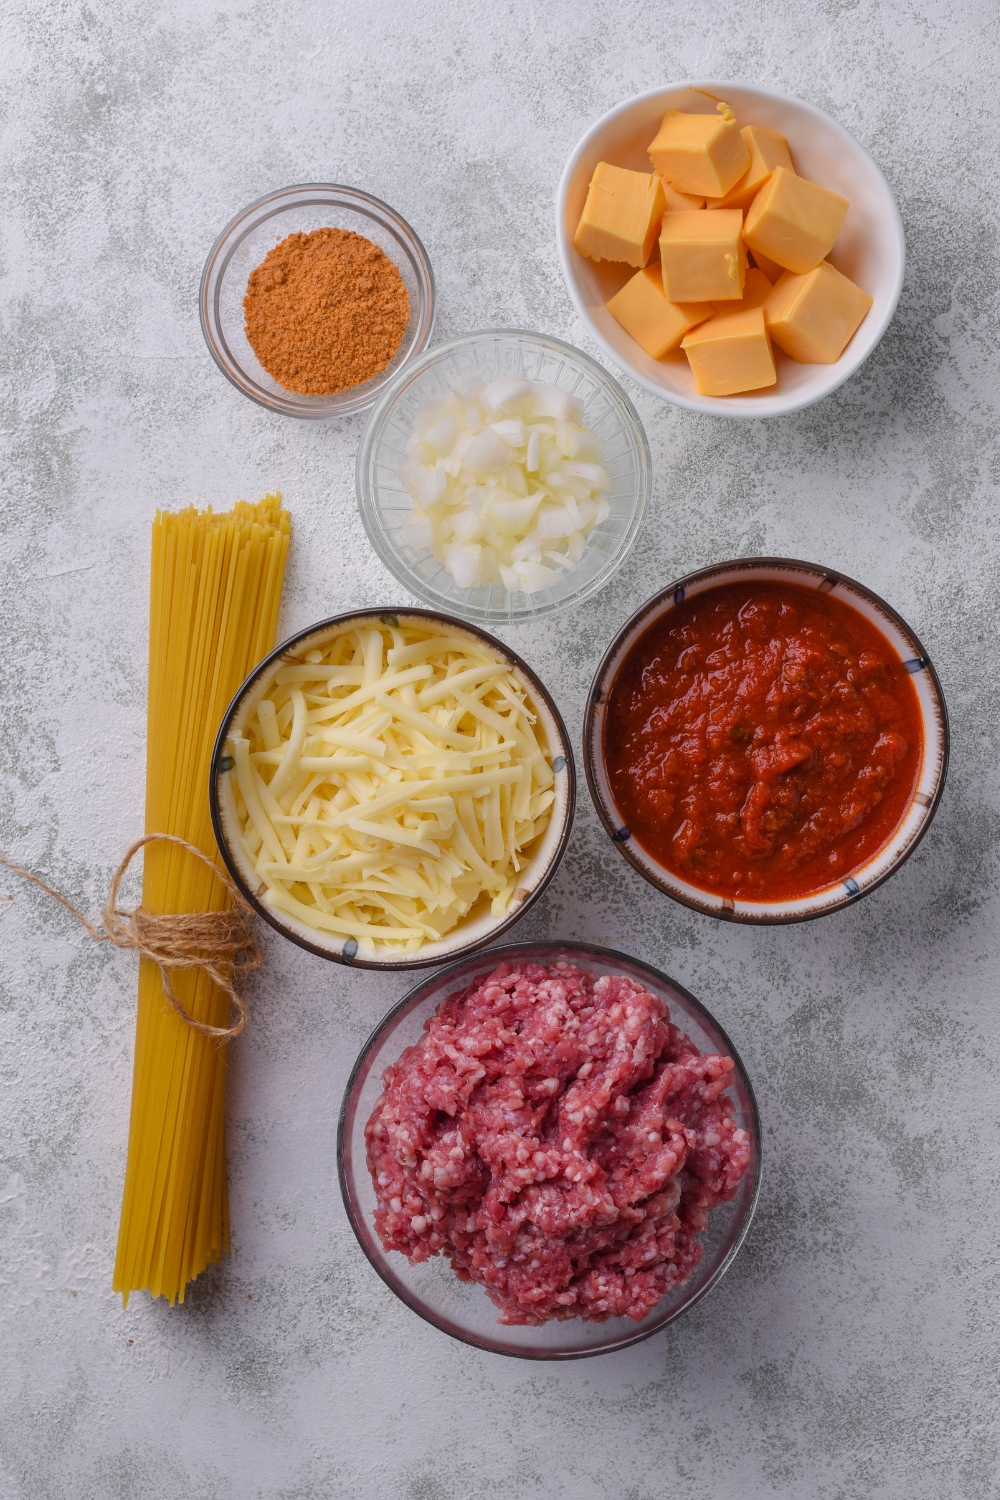 An assortment of ingredients including a bundle of dried spaghetti noodles and bowls of raw ground beef, cubes of Velveeta cheese, shredded cheese, salsa, diced onion, and spices, all on a grey countertop.